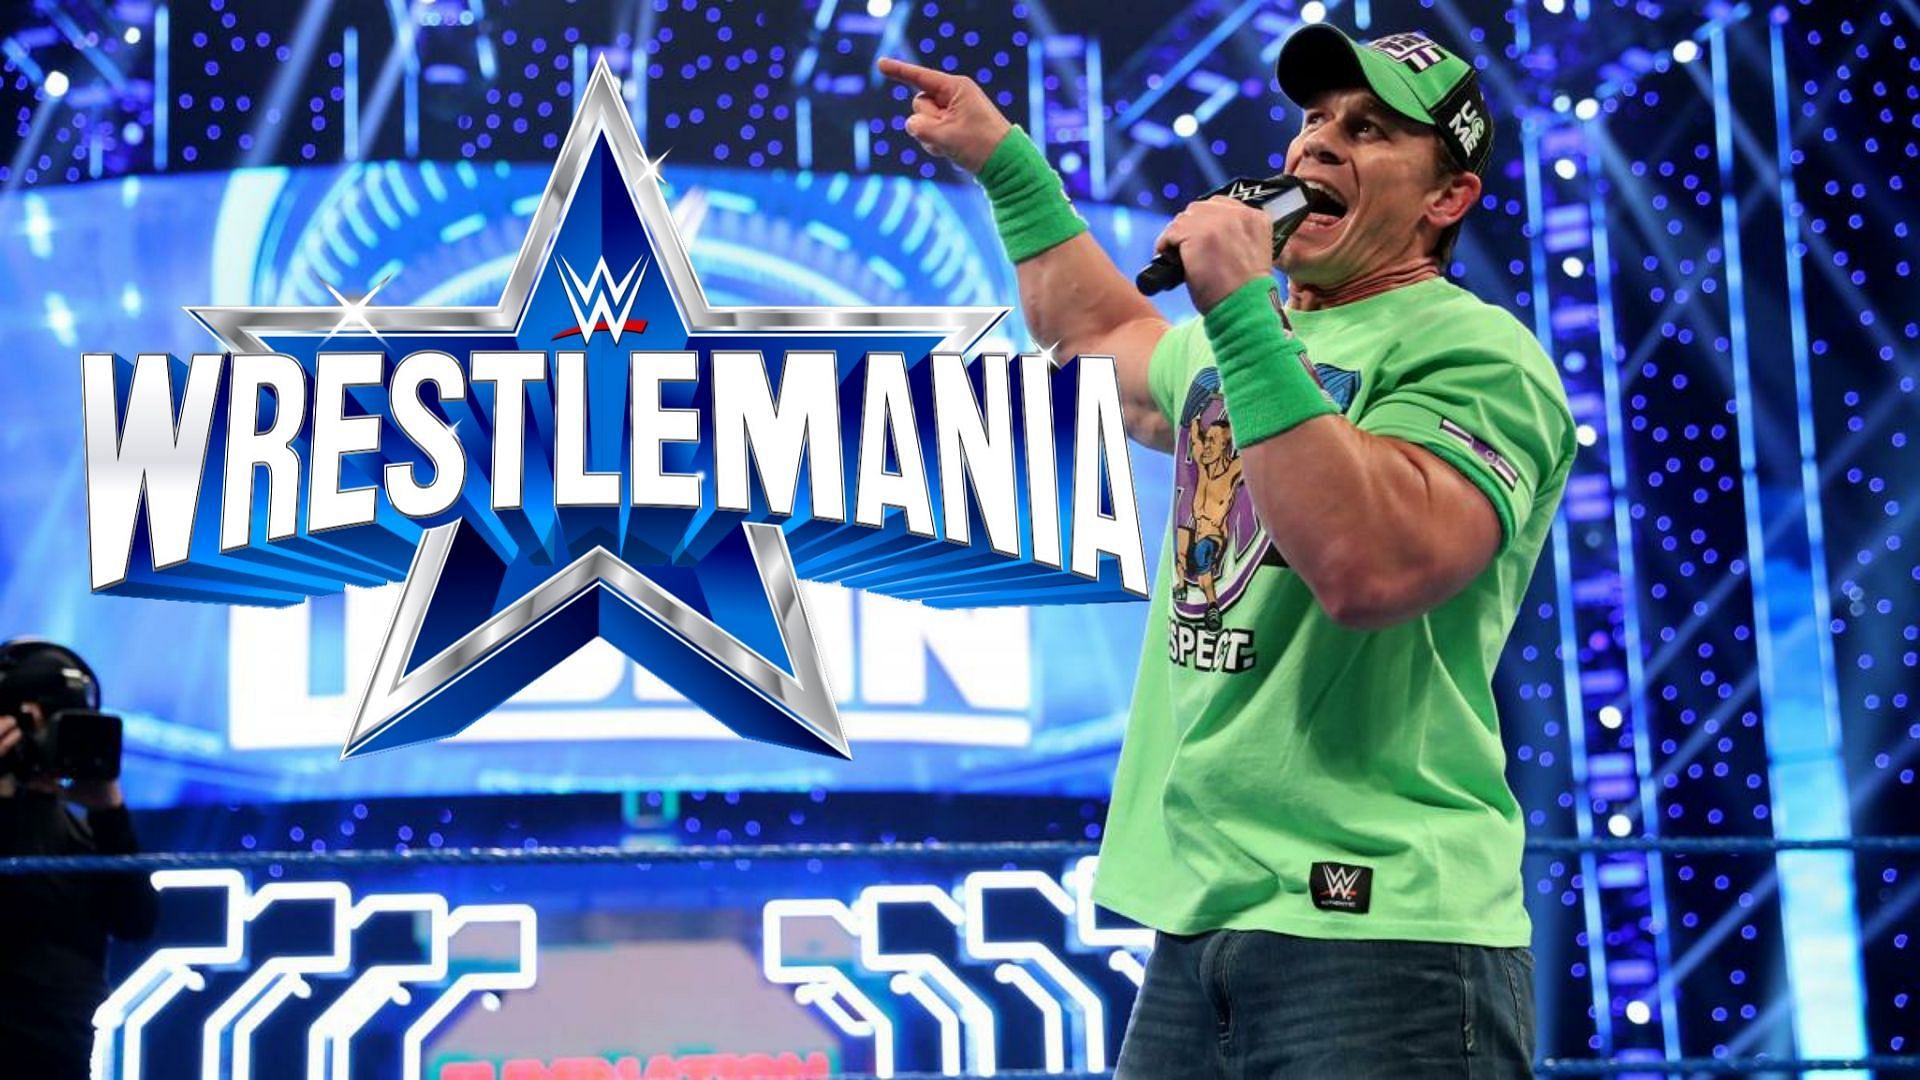 Could the Leader of Cenation show up at WrestleMania 38?